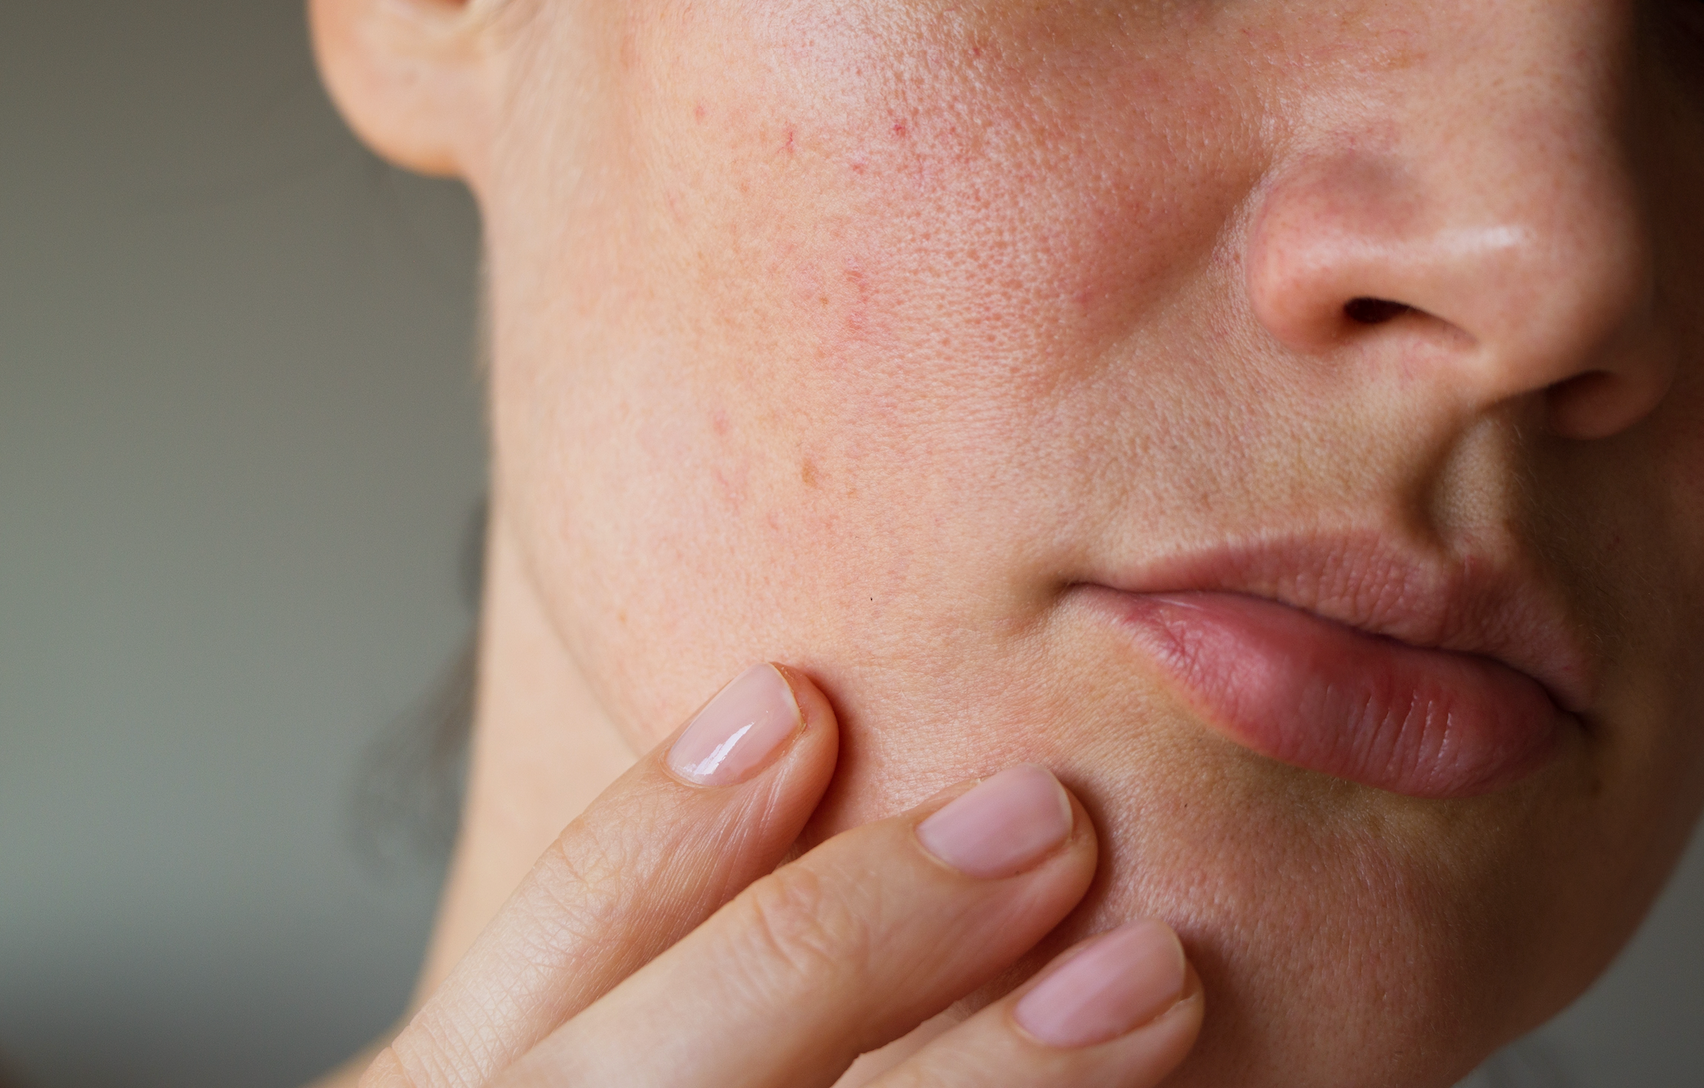 Let’s Debunk These 5 Myths About Your Pores